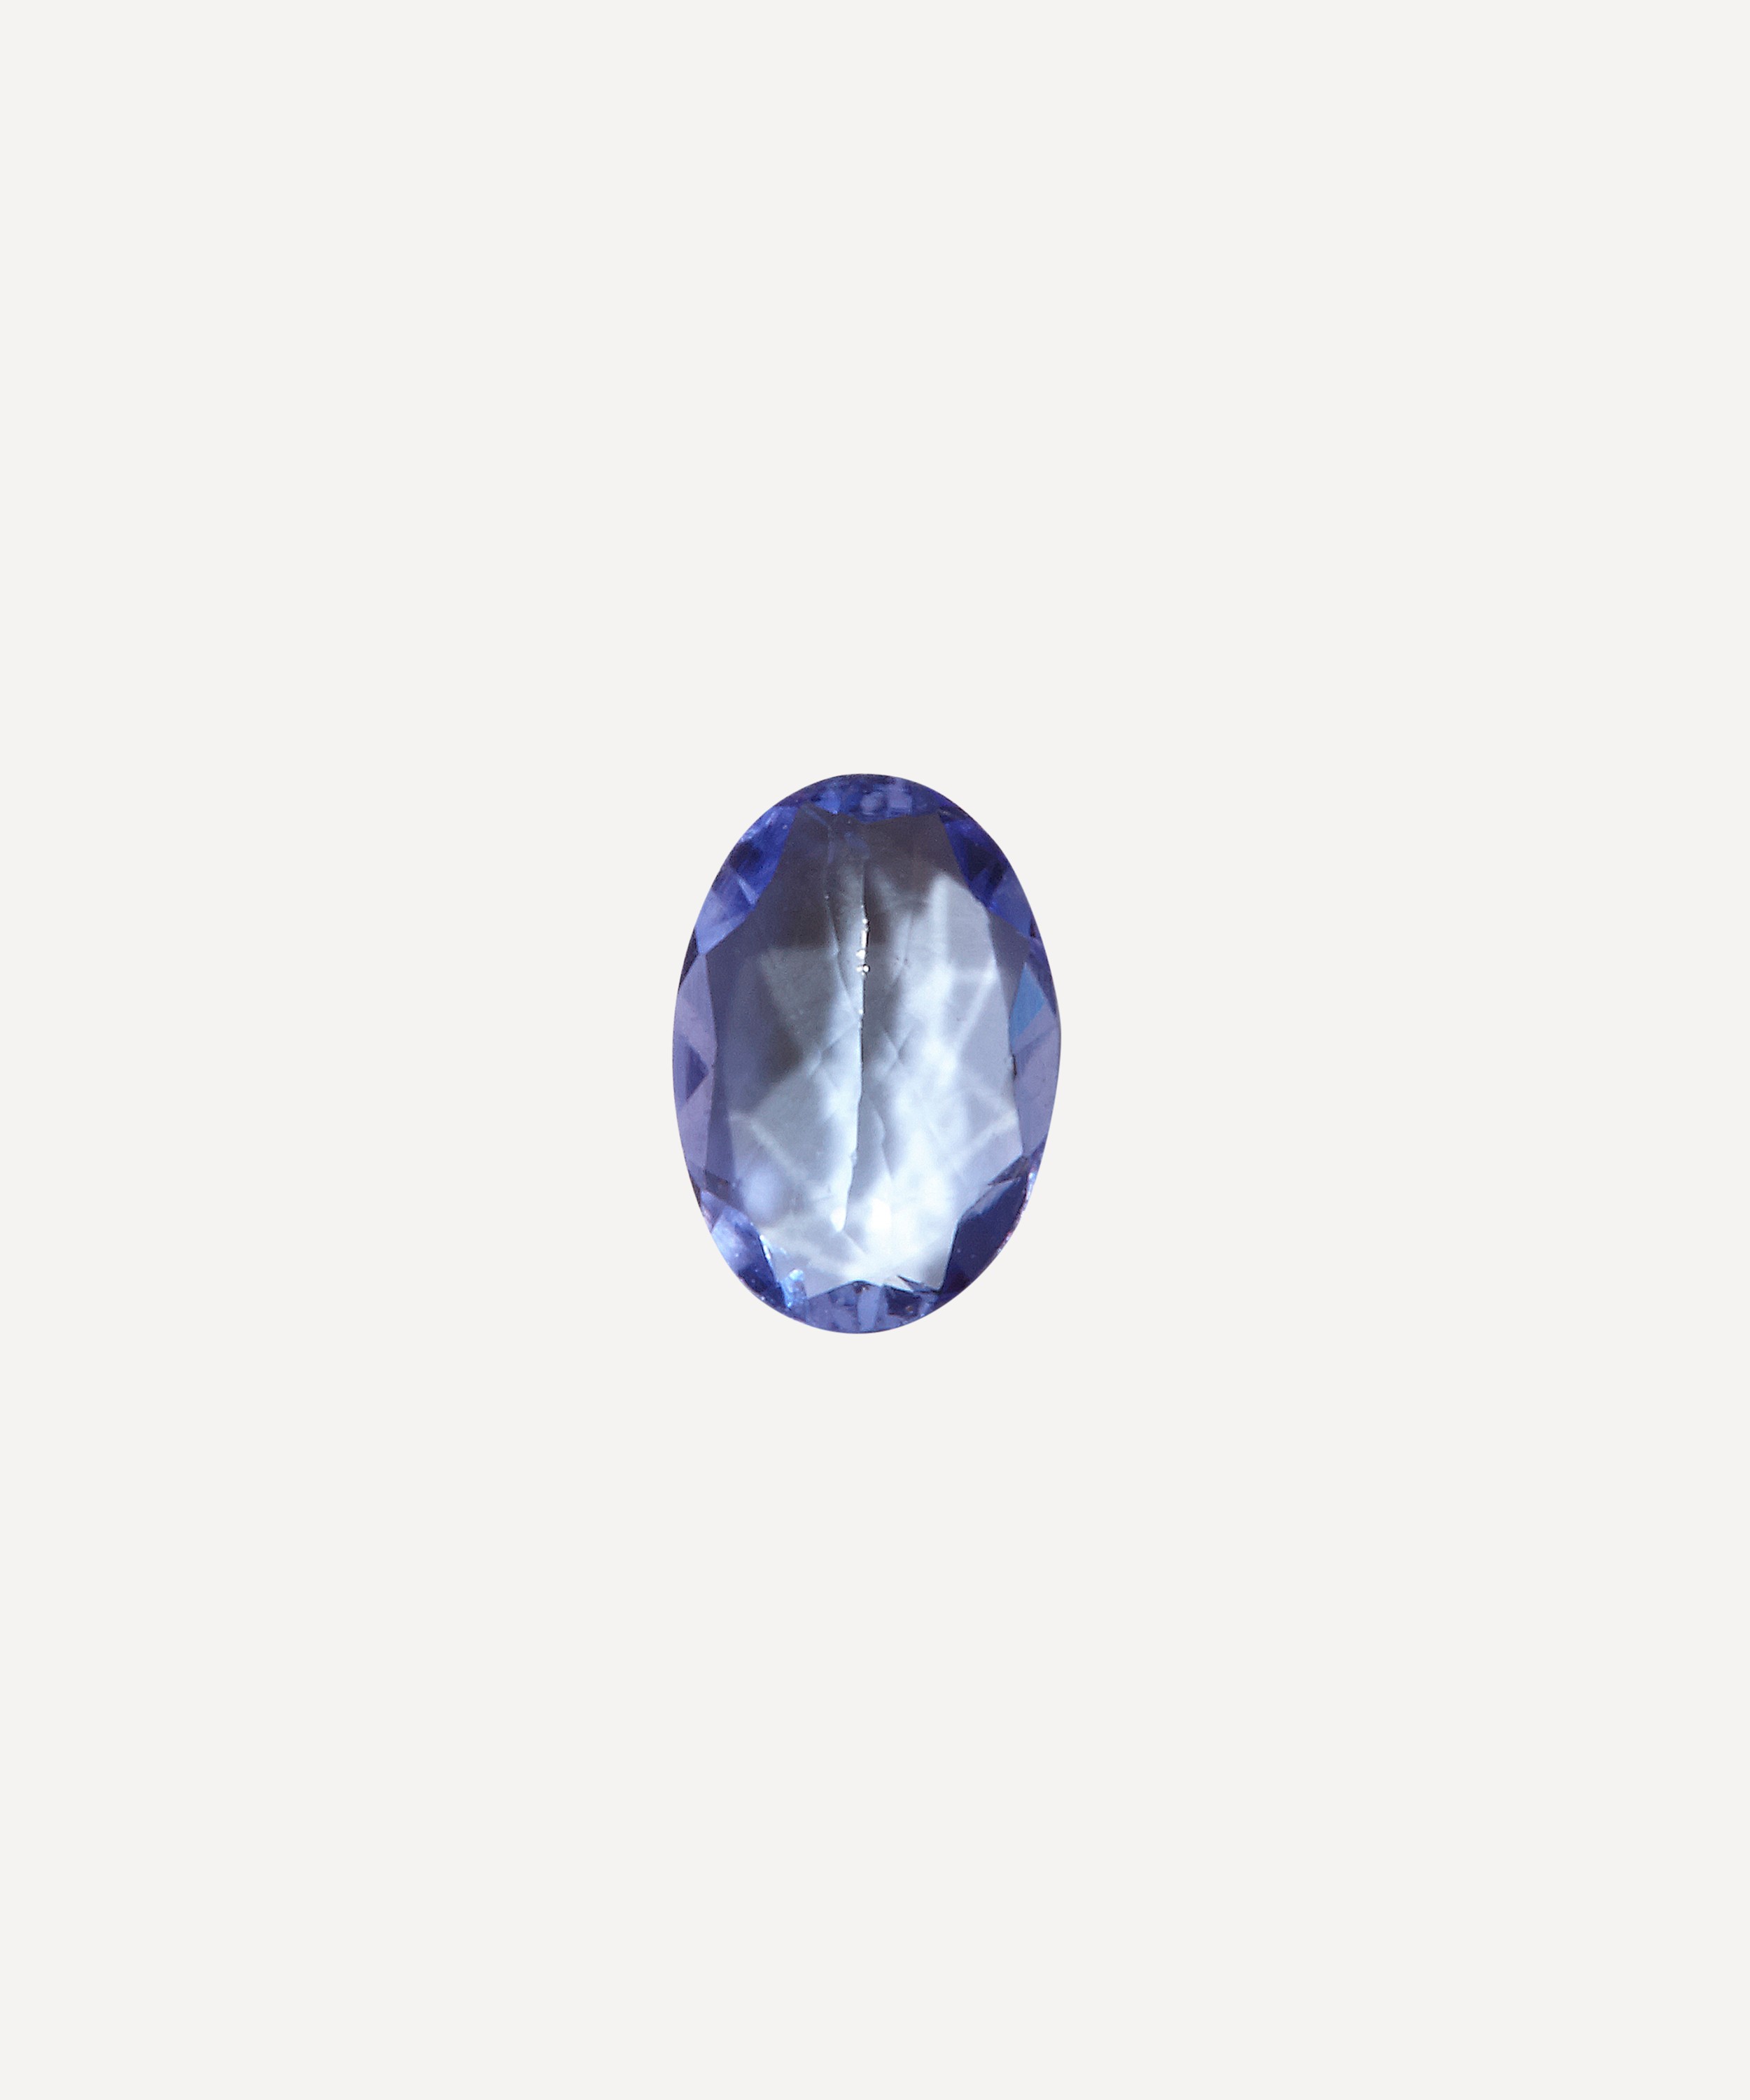 Loquet London - Sapphire September Birthstone Charm image number 0